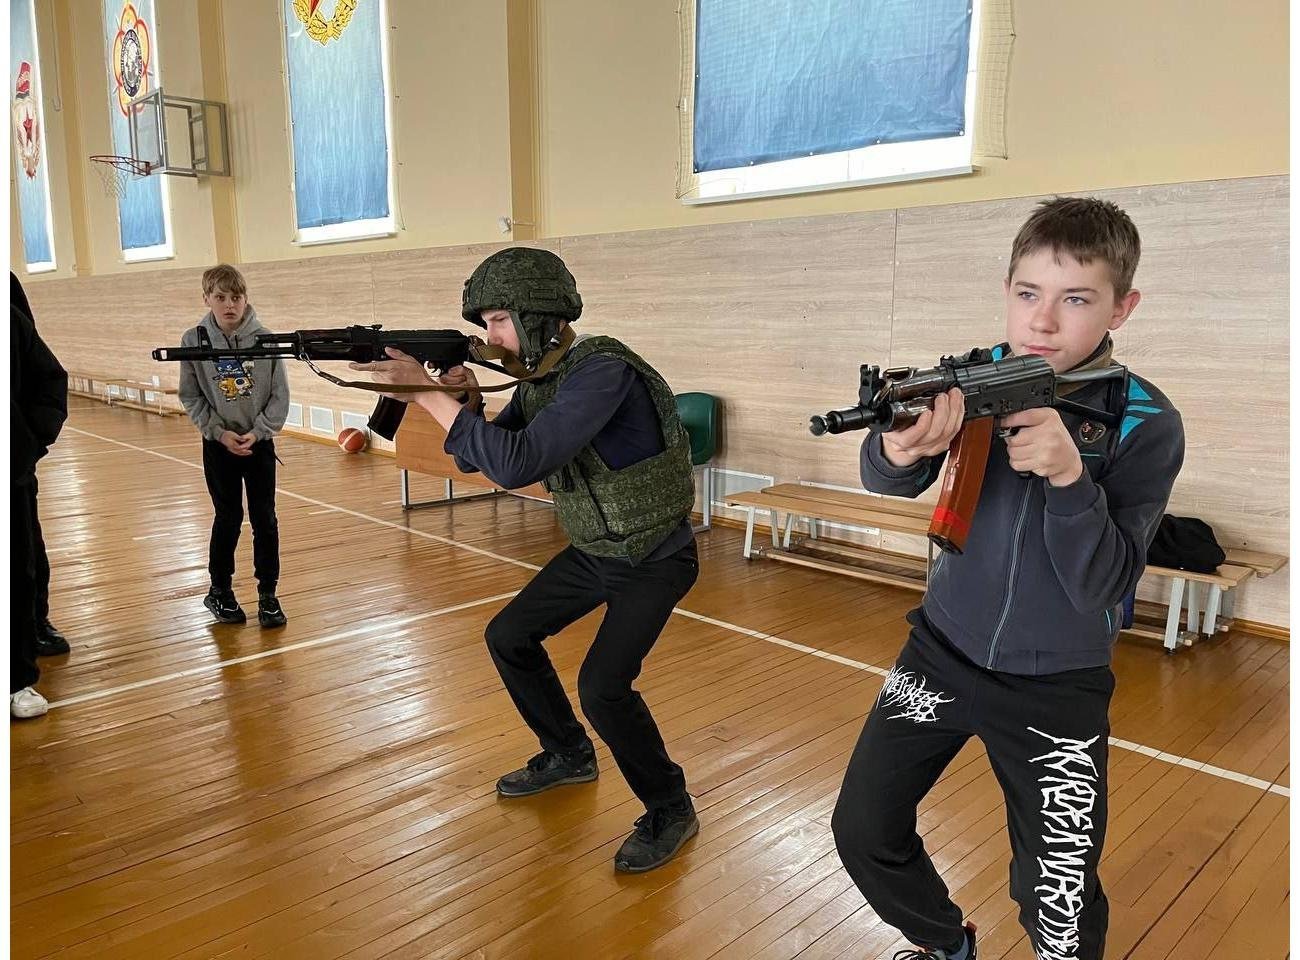 The 49th Radio Engineering Brigade practicing an AK shooting stance with children